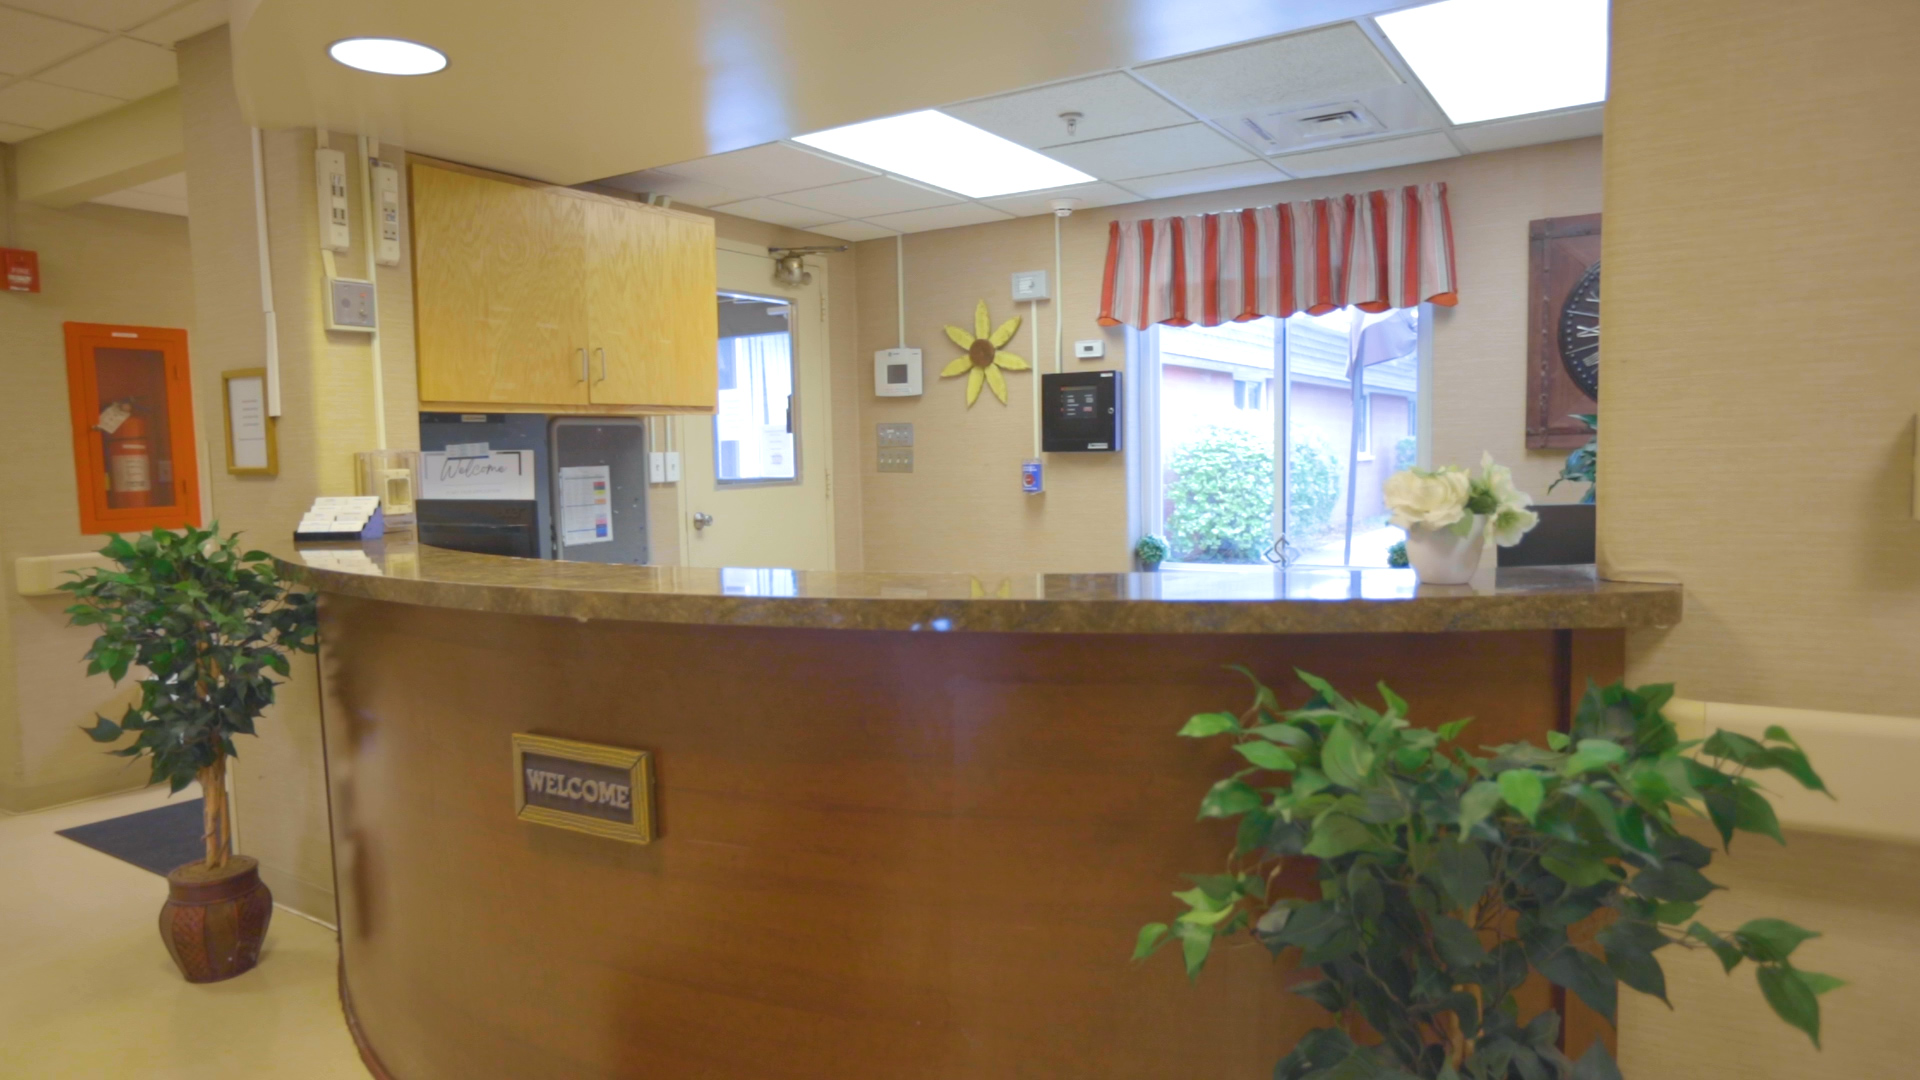 Front Desk with welcome sign. One window in the background with daylight shining through.